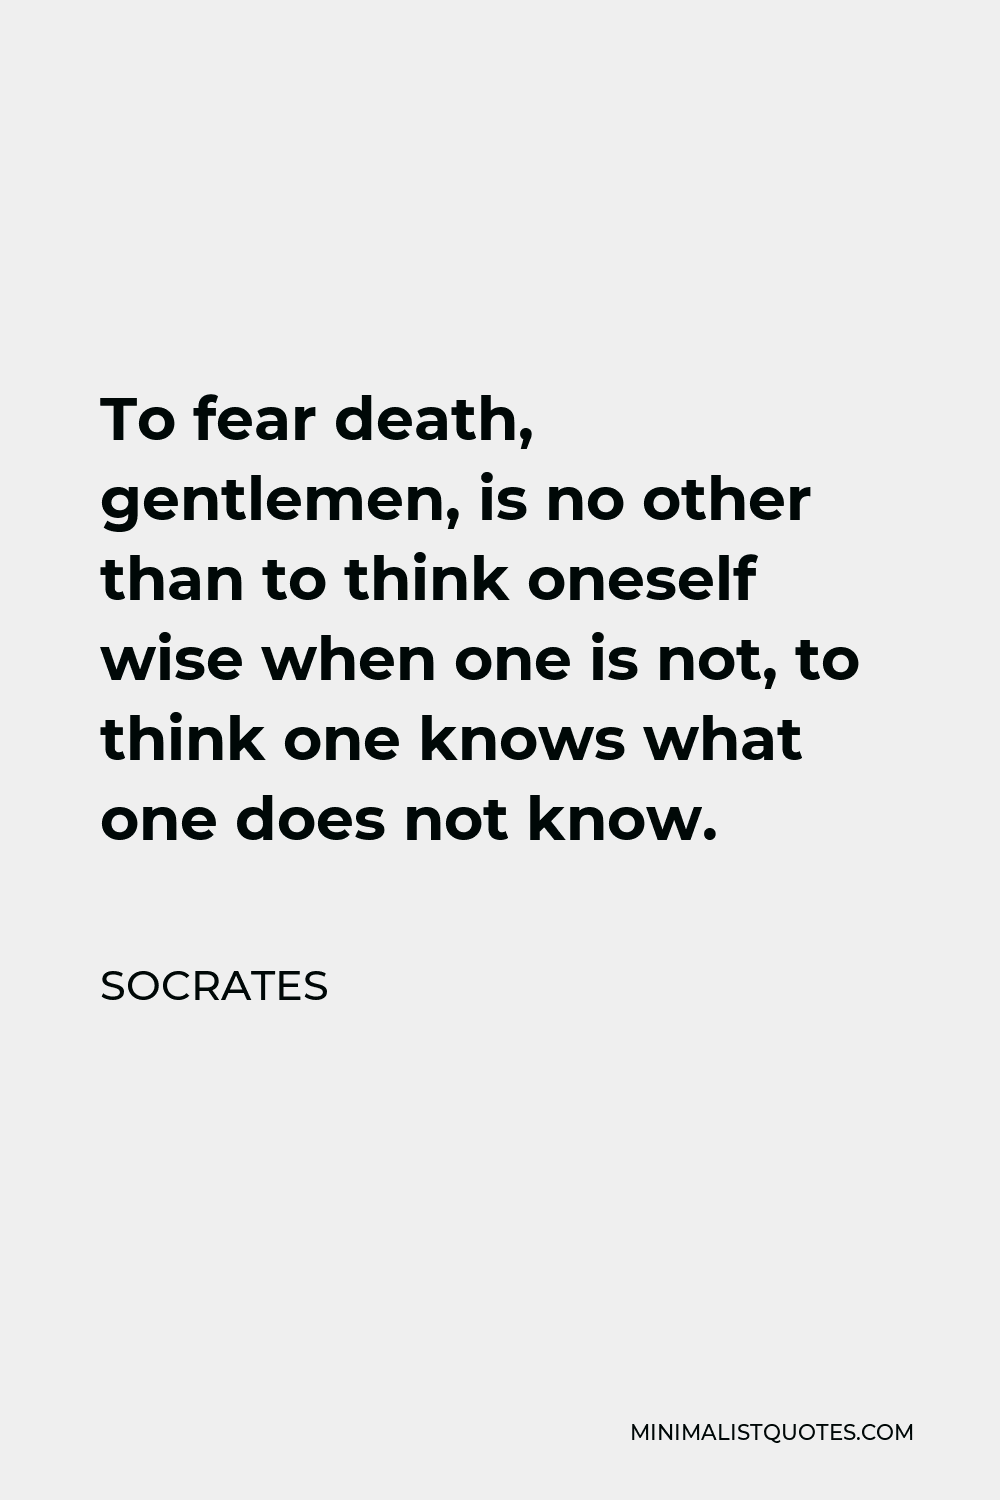 Socrates Quote - To fear death, gentlemen, is no other than to think oneself wise when one is not, to think one knows what one does not know.